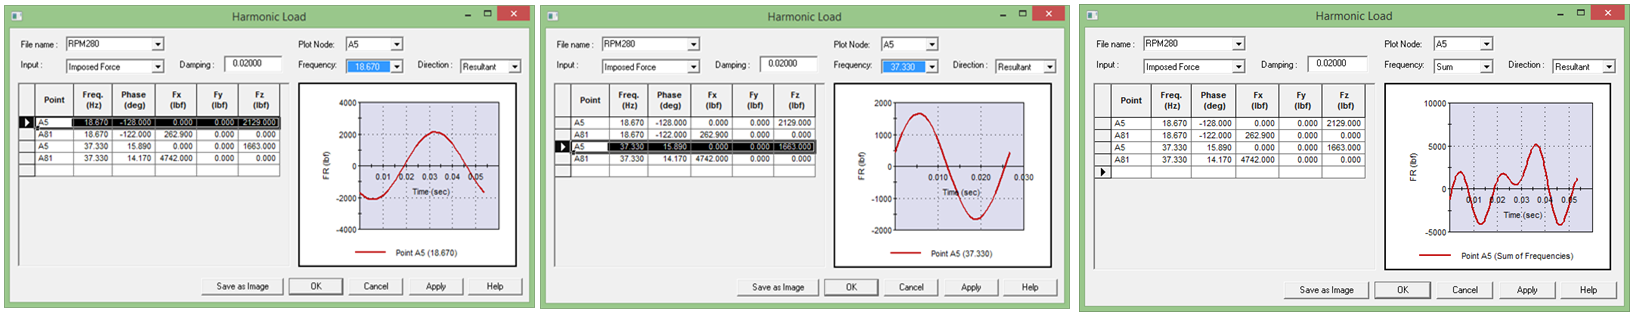 Definition of main waves and harmonics in AutoPIPE.